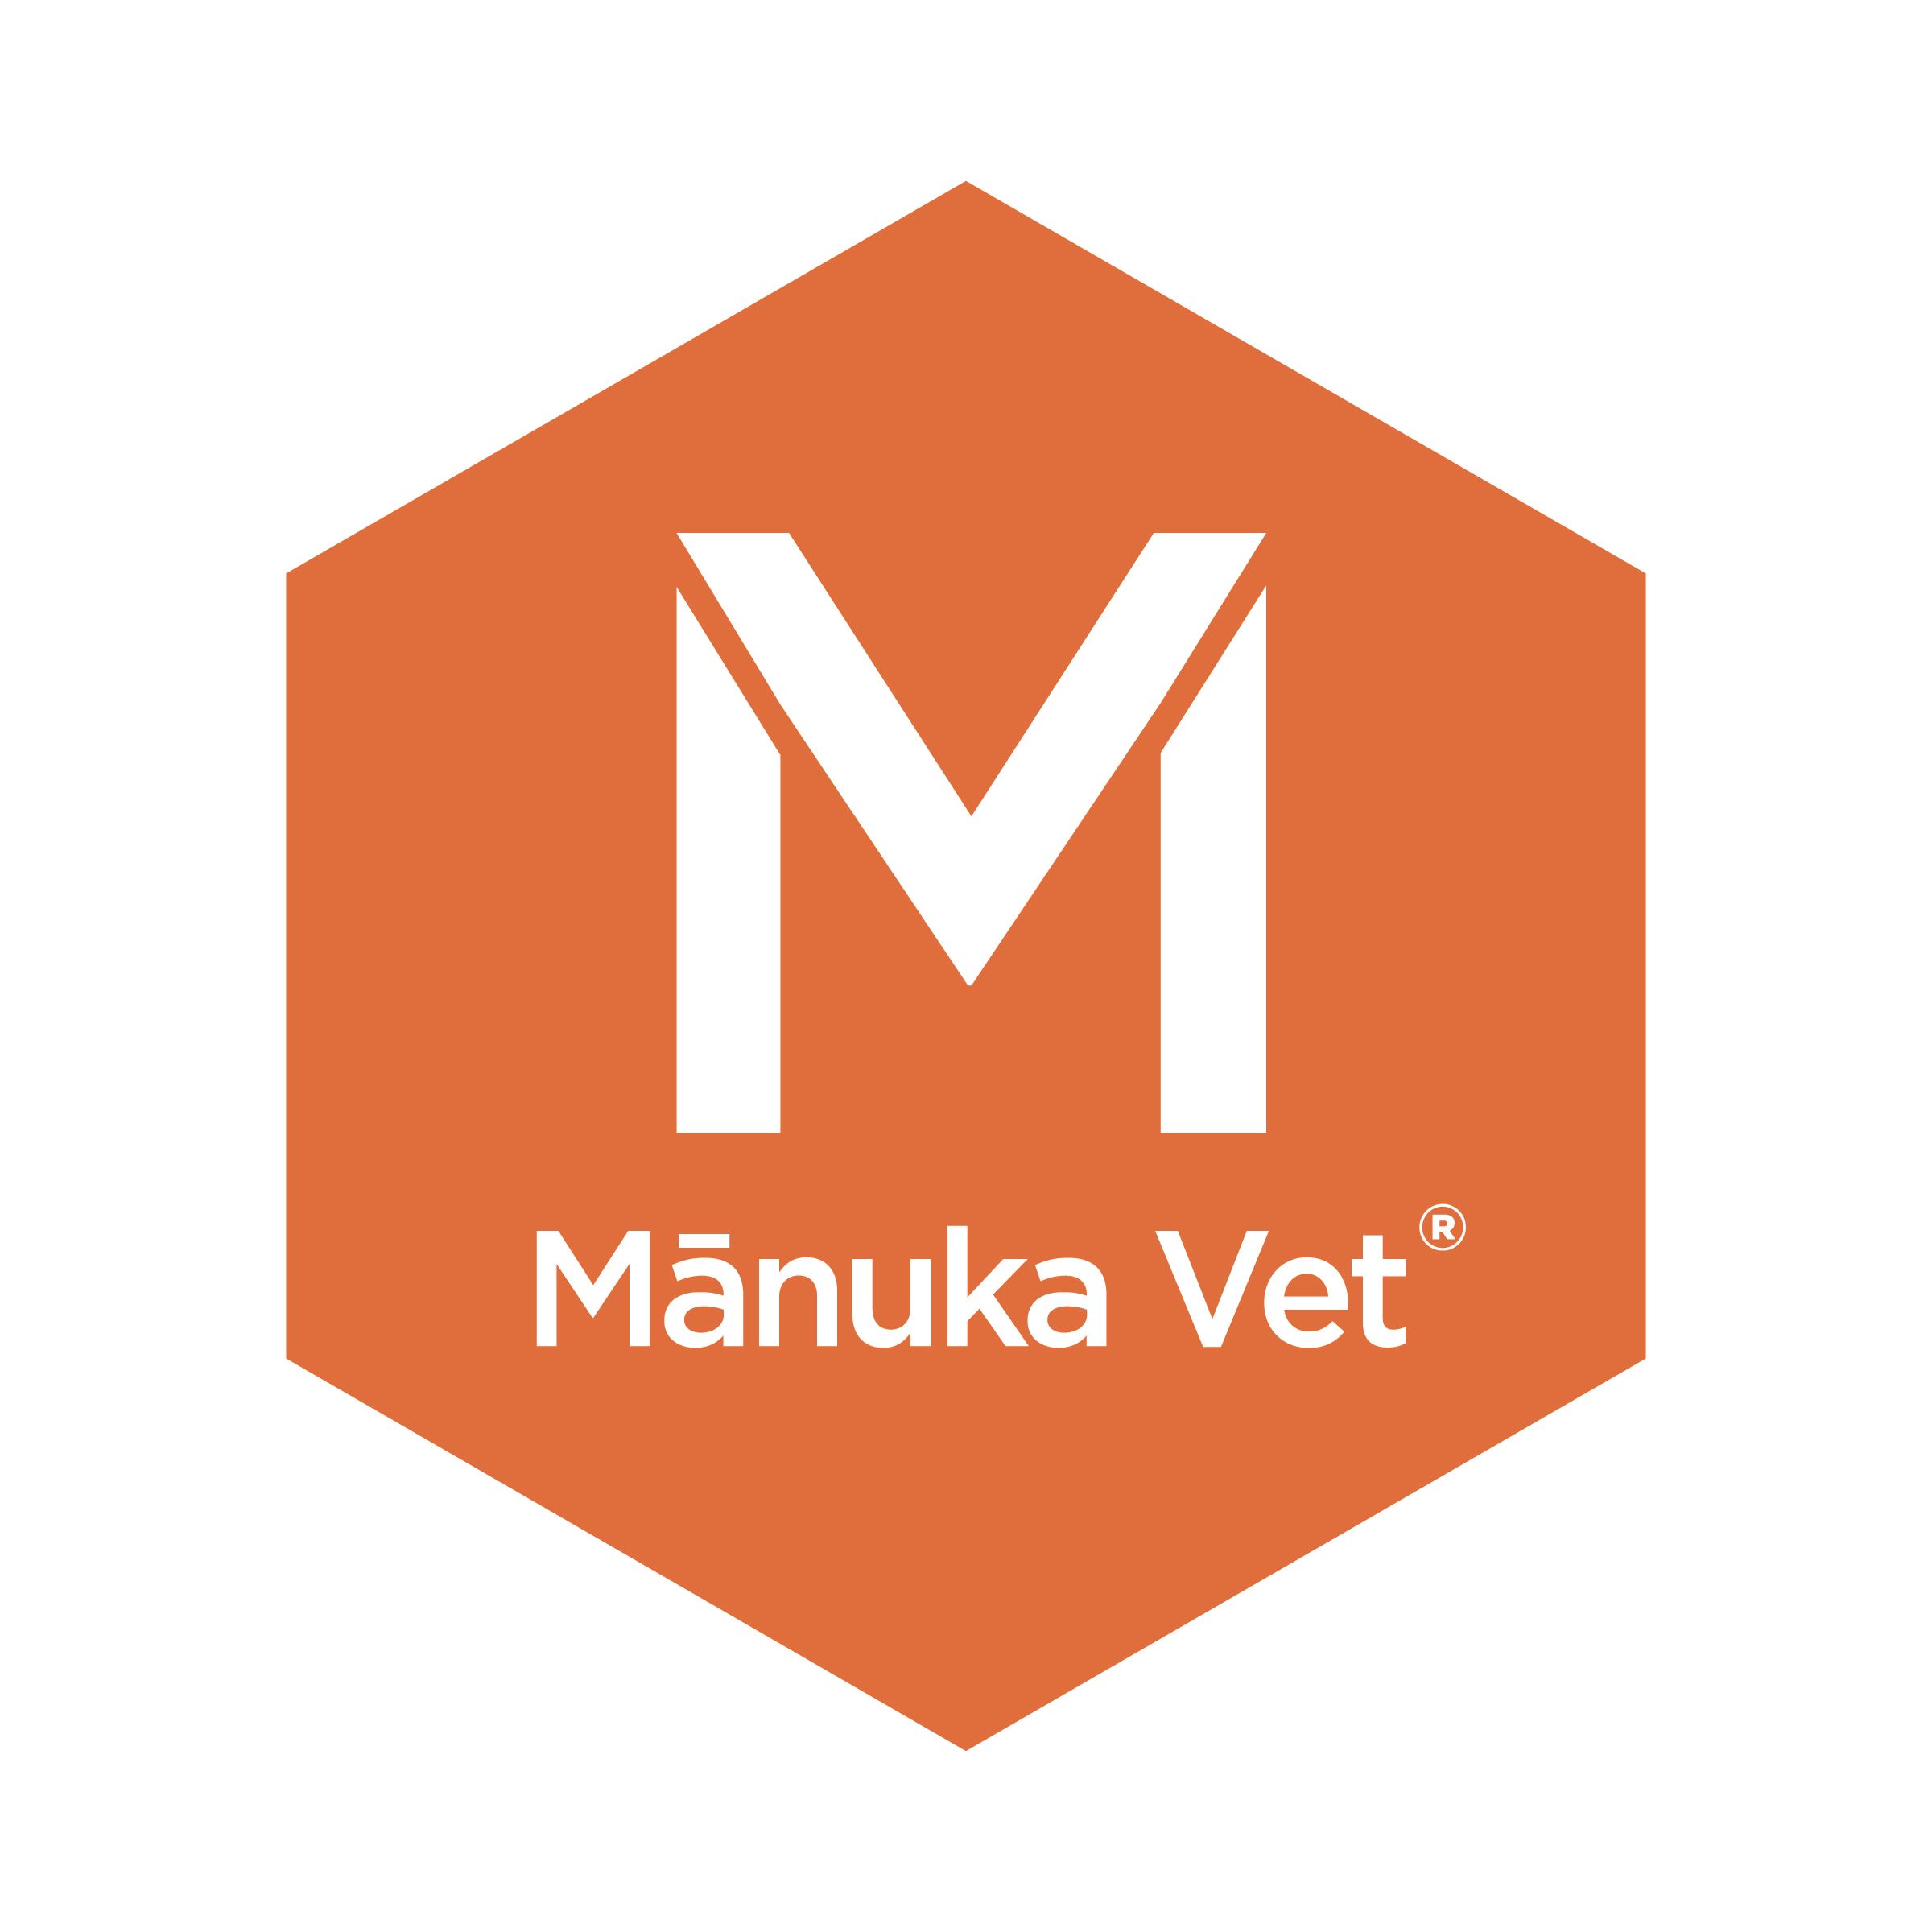 MANUKA VET PRODUCTS NOW AVAILABLE TO UNITED KINGDOM PET SPECIALTY TRADE